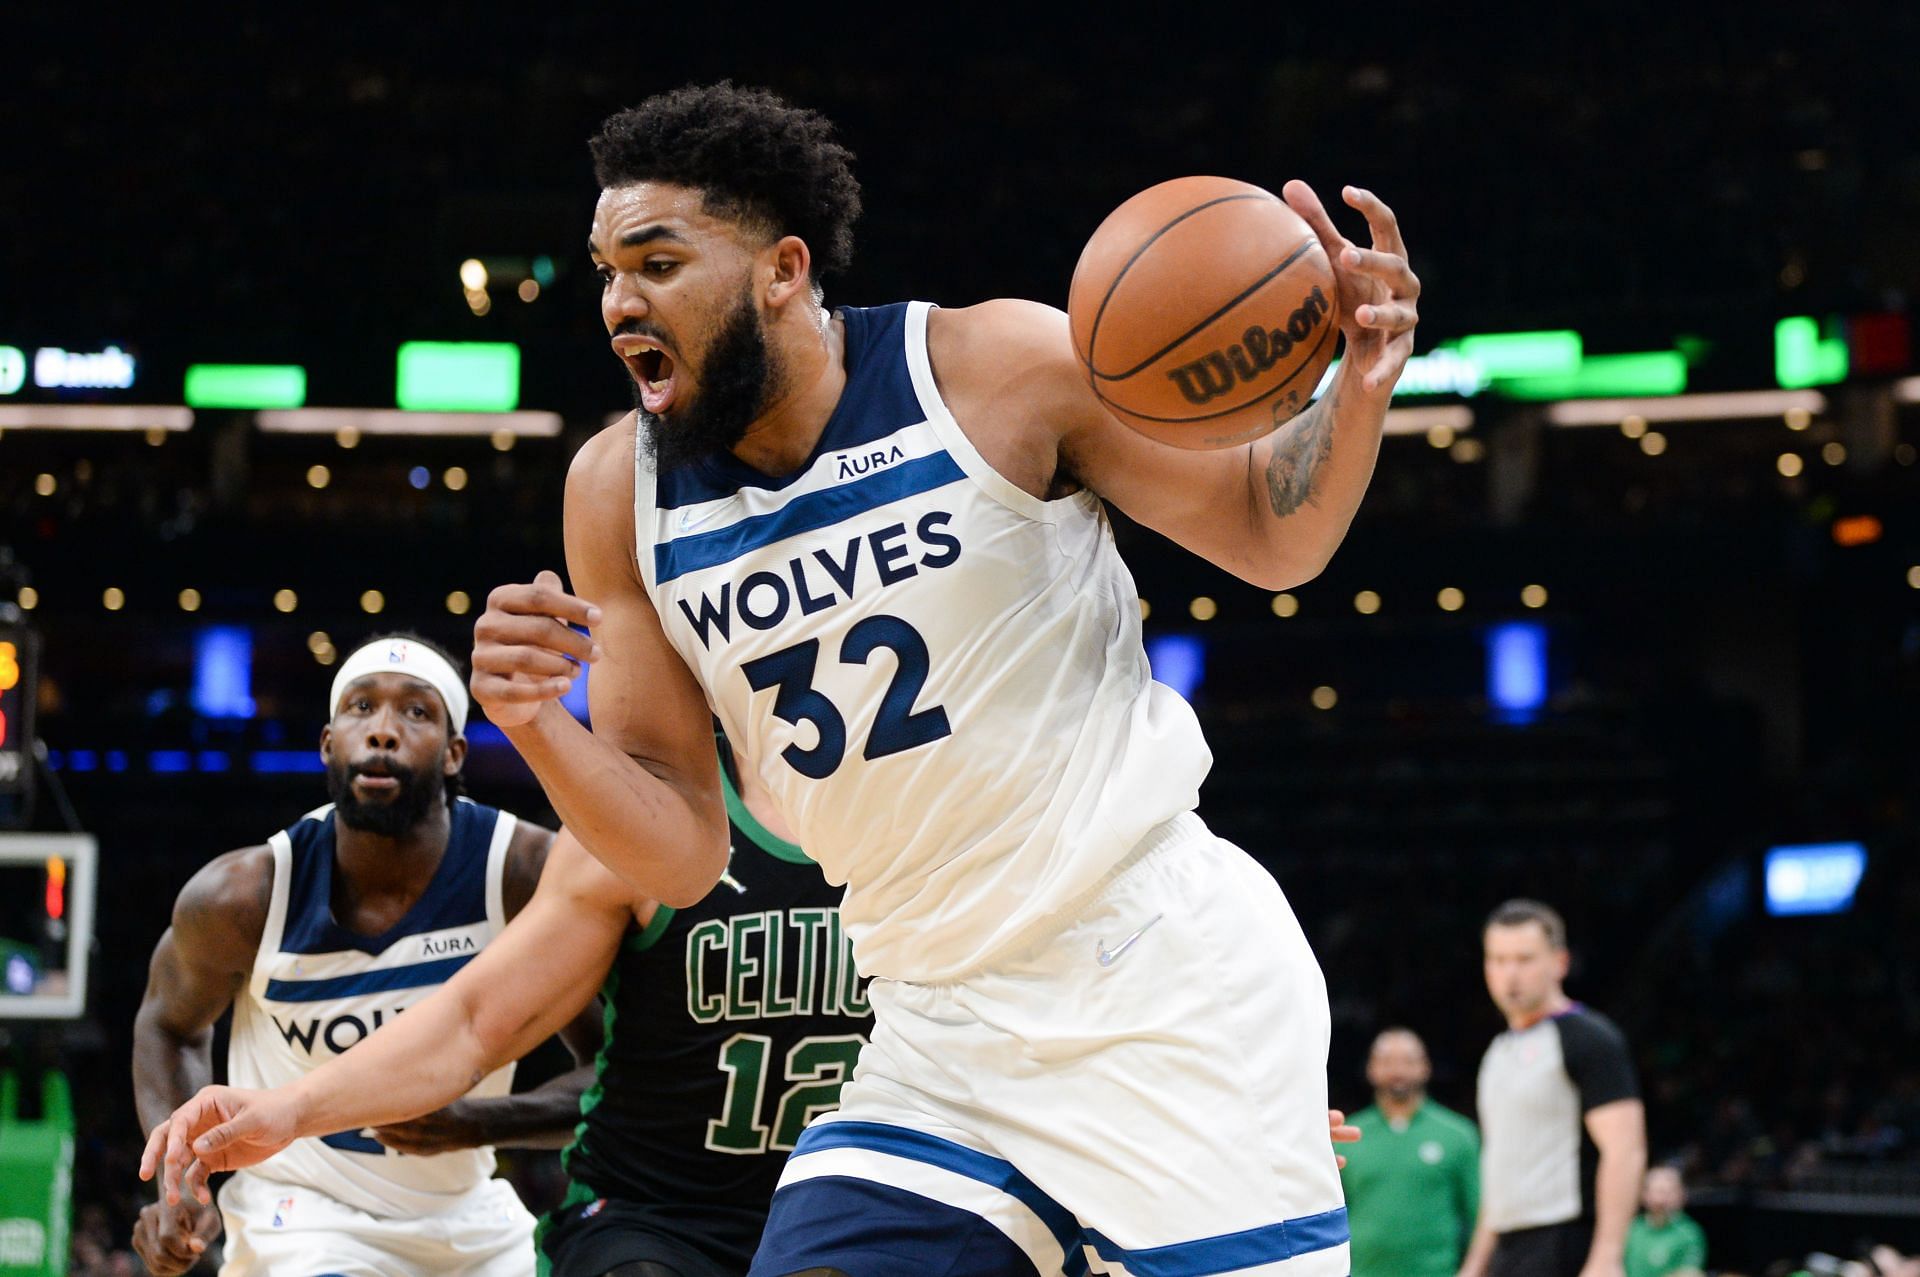 Karl-Anthony Towns of the Timberwolves